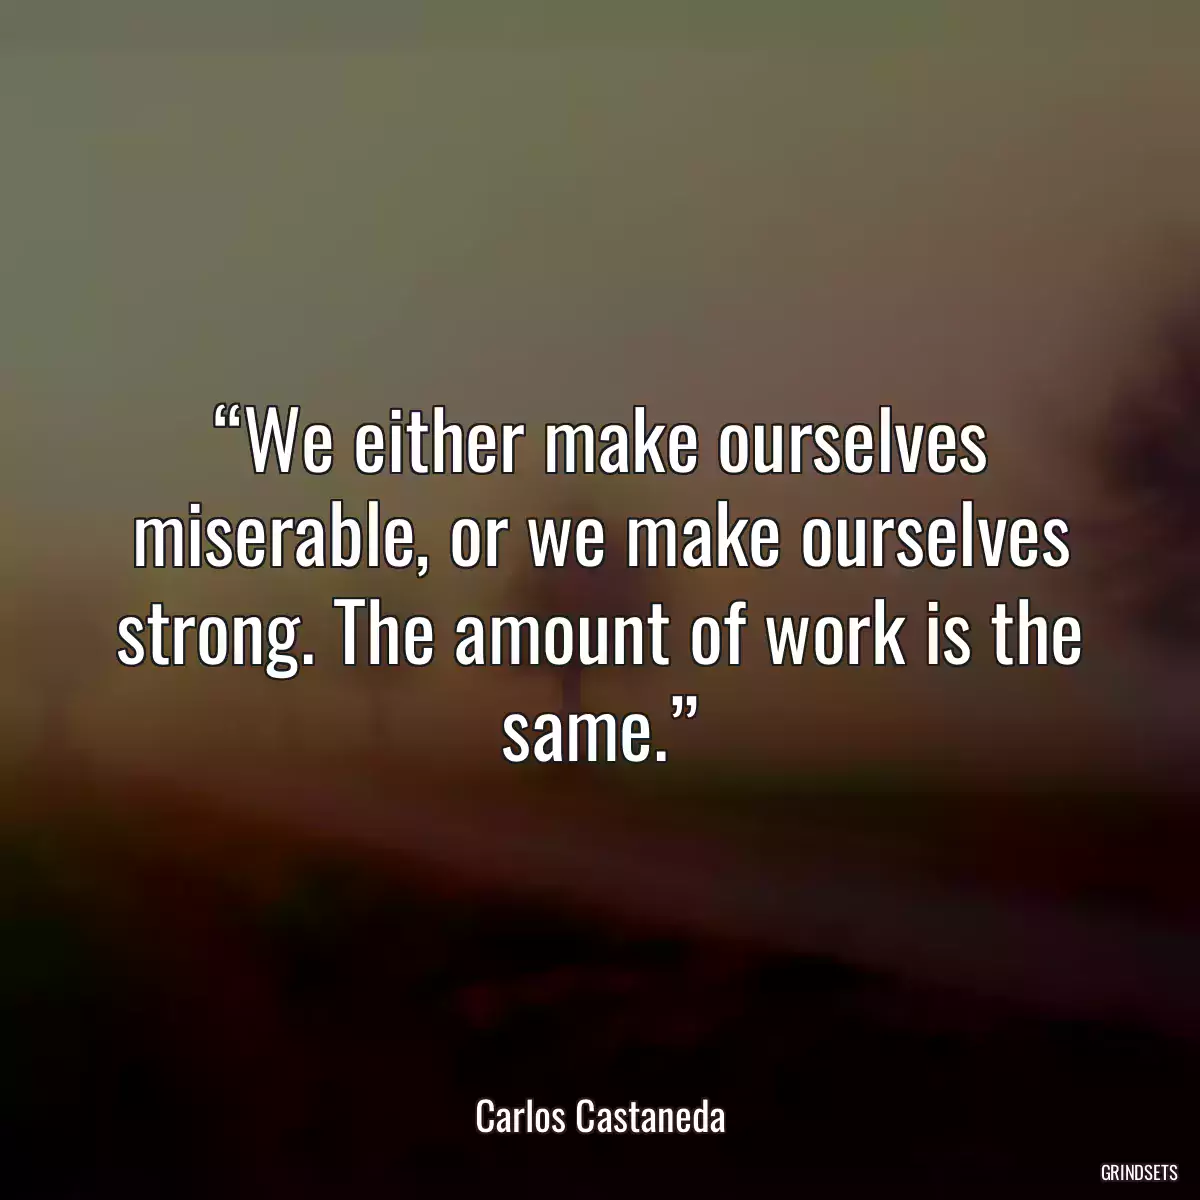 “We either make ourselves miserable, or we make ourselves strong. The amount of work is the same.”